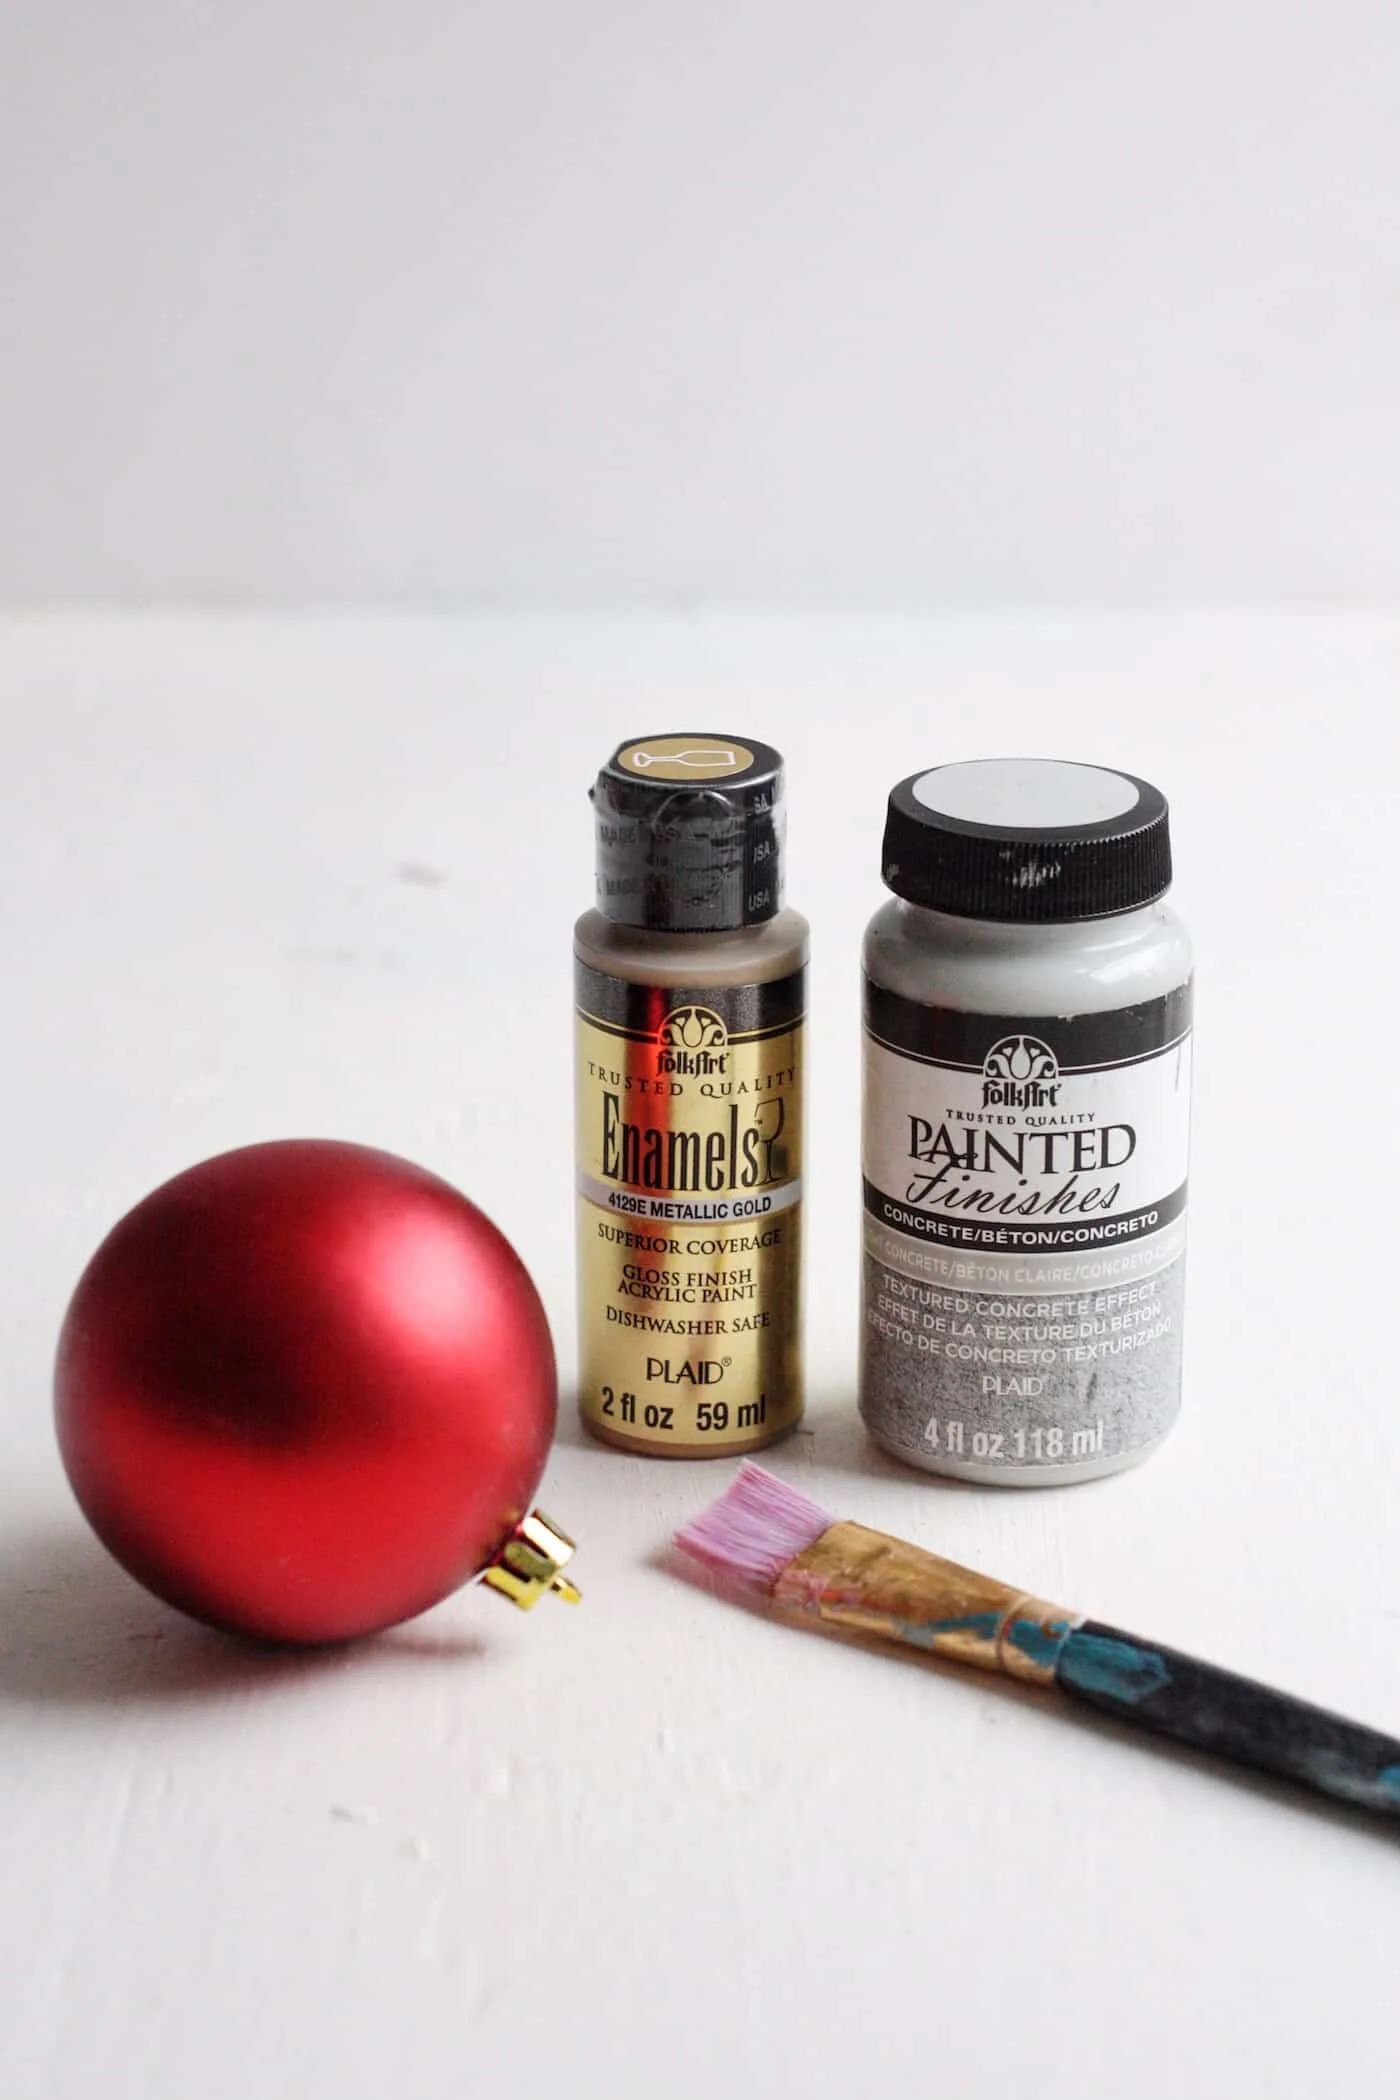 Red Christmas ball ornament, Enamel gold paint, and concrete painted finish with a paint brush